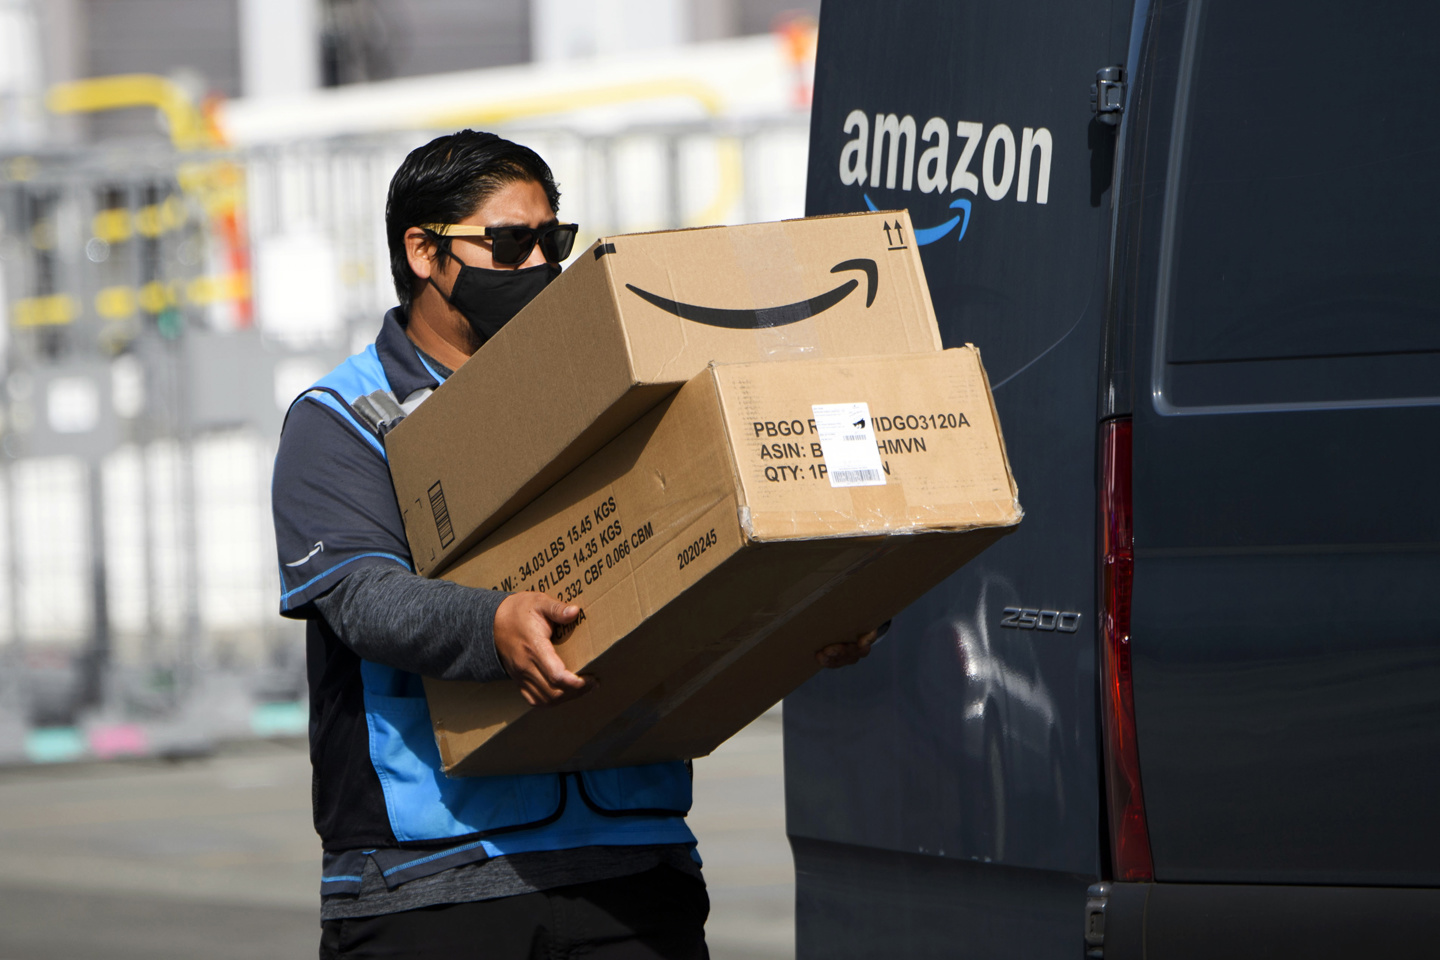 Amazon announces a second Prime Day sale that will take place next month